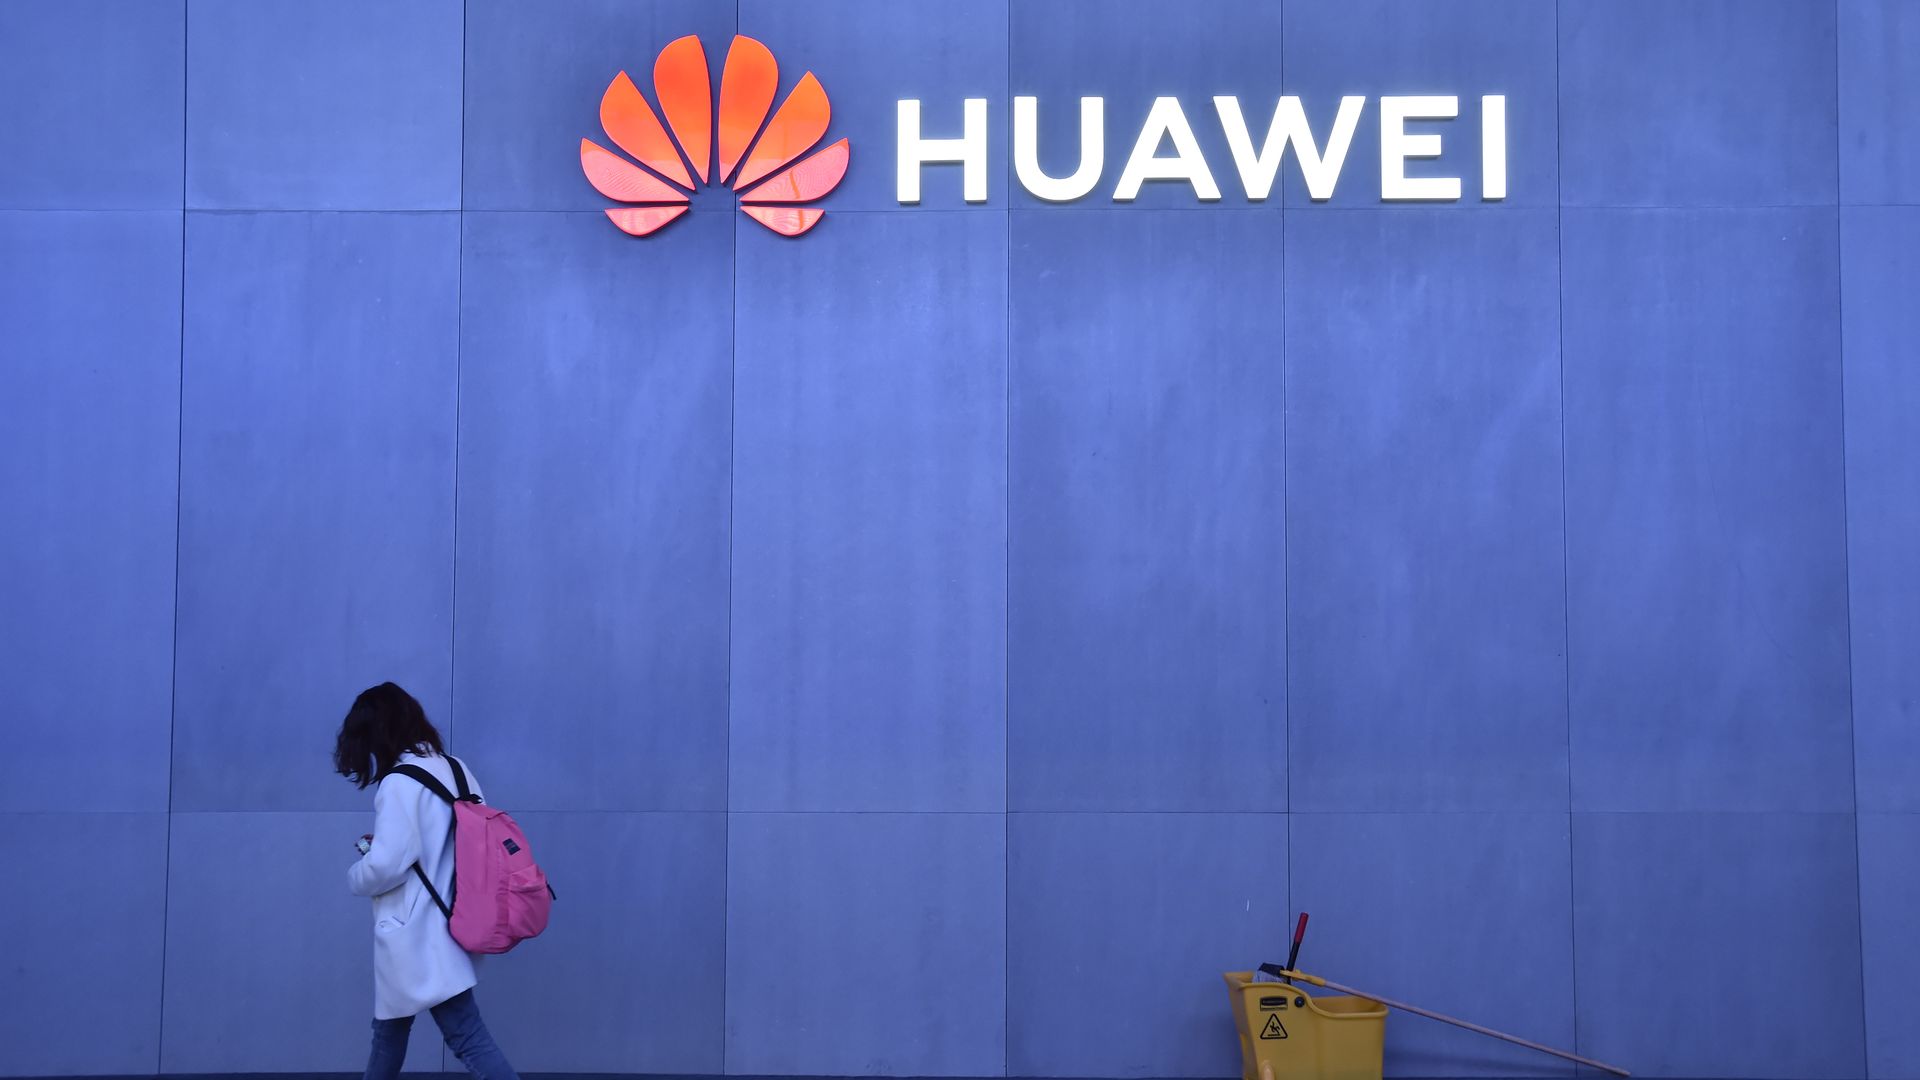 A blue wall with a neon sign that says "Huawei." There is a young person wearing a backpack walking in front of the wall.